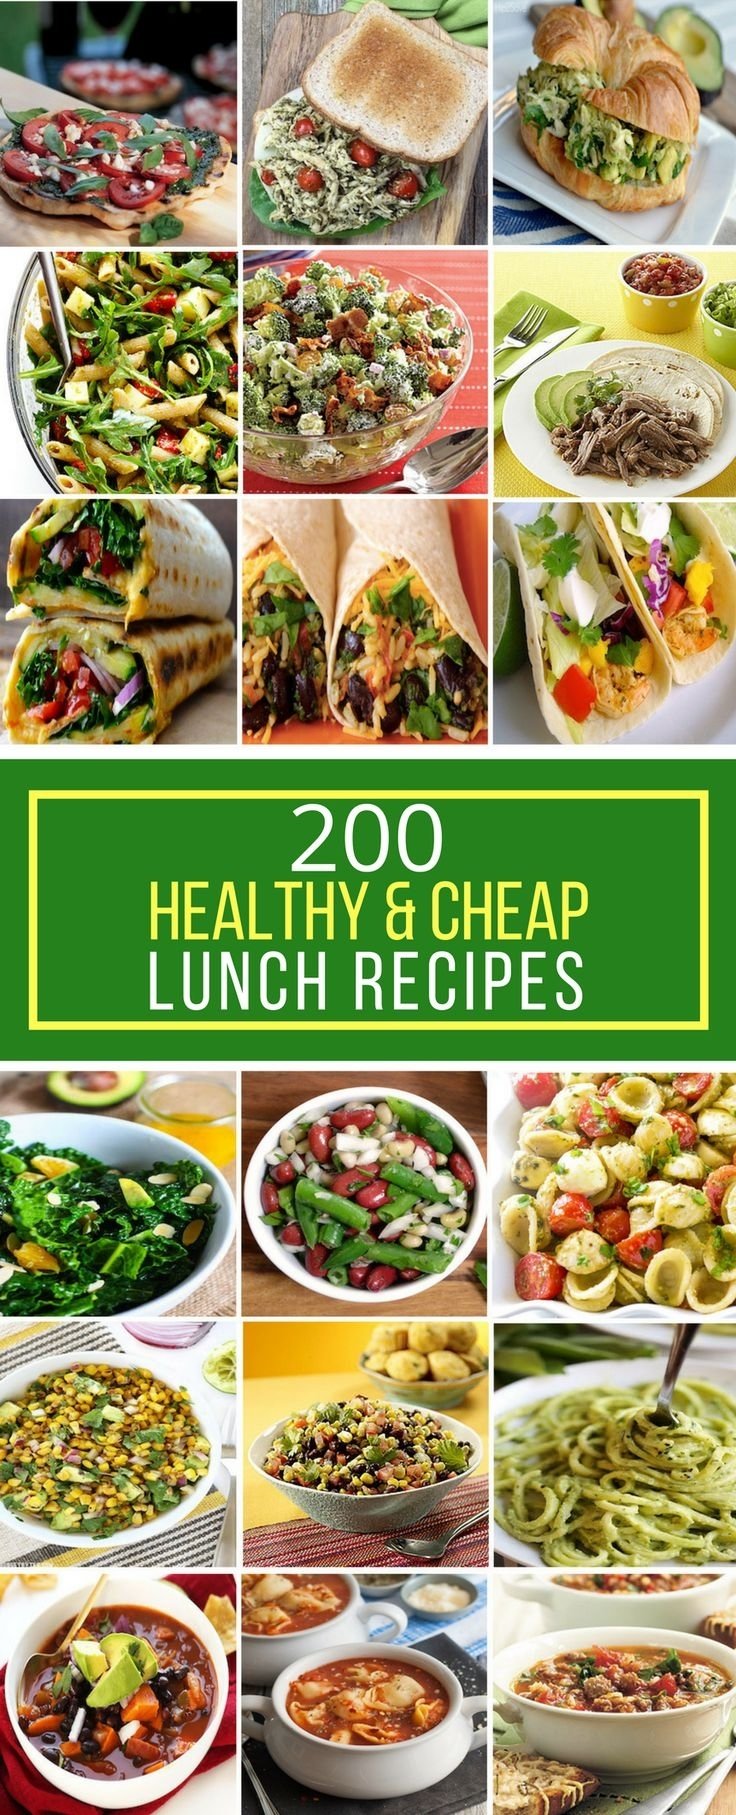 10 Famous Cheap Healthy Lunch Ideas For Work 495 best school lunch ideas images on pinterest healthy lunch 2022